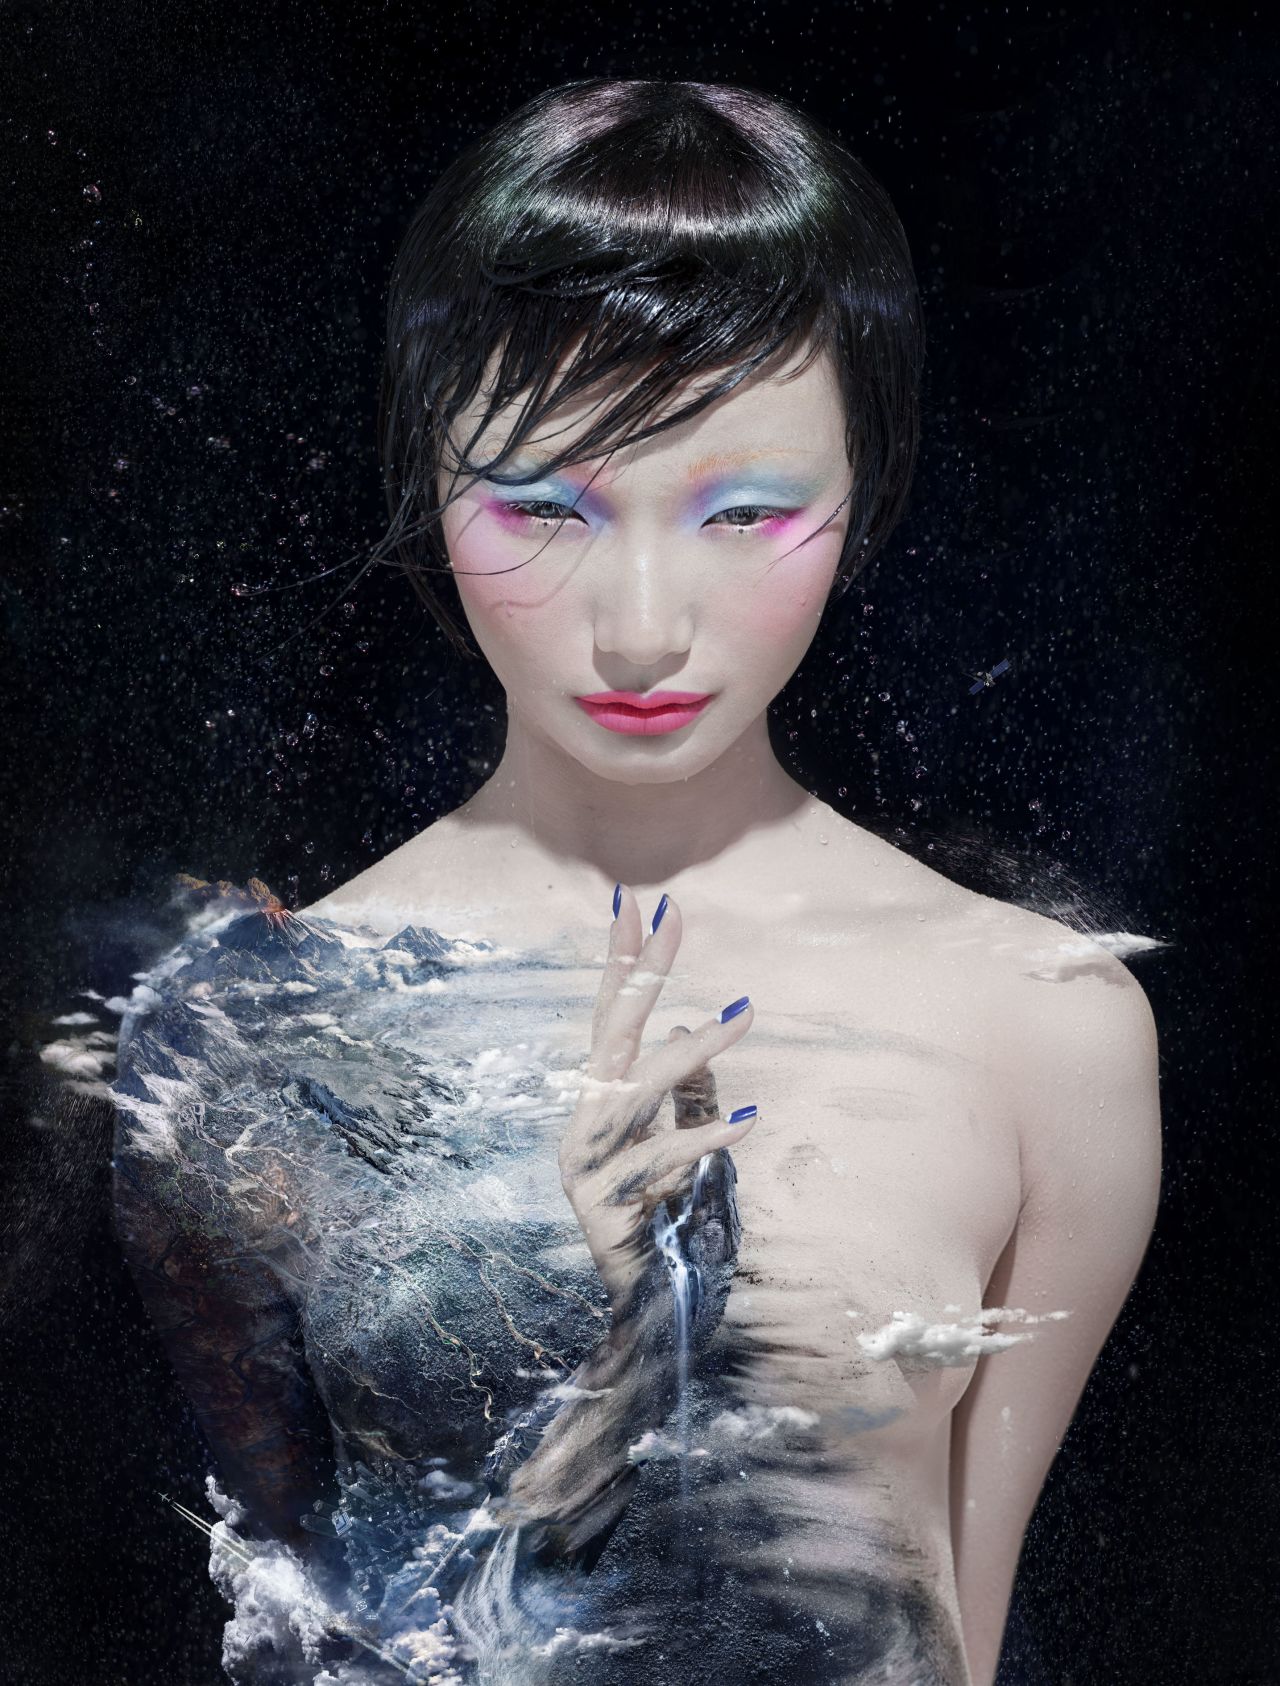 Chen Man collaborated with MAC cosmetics. She shot this photographer for its "Love and Water" series in 2012.